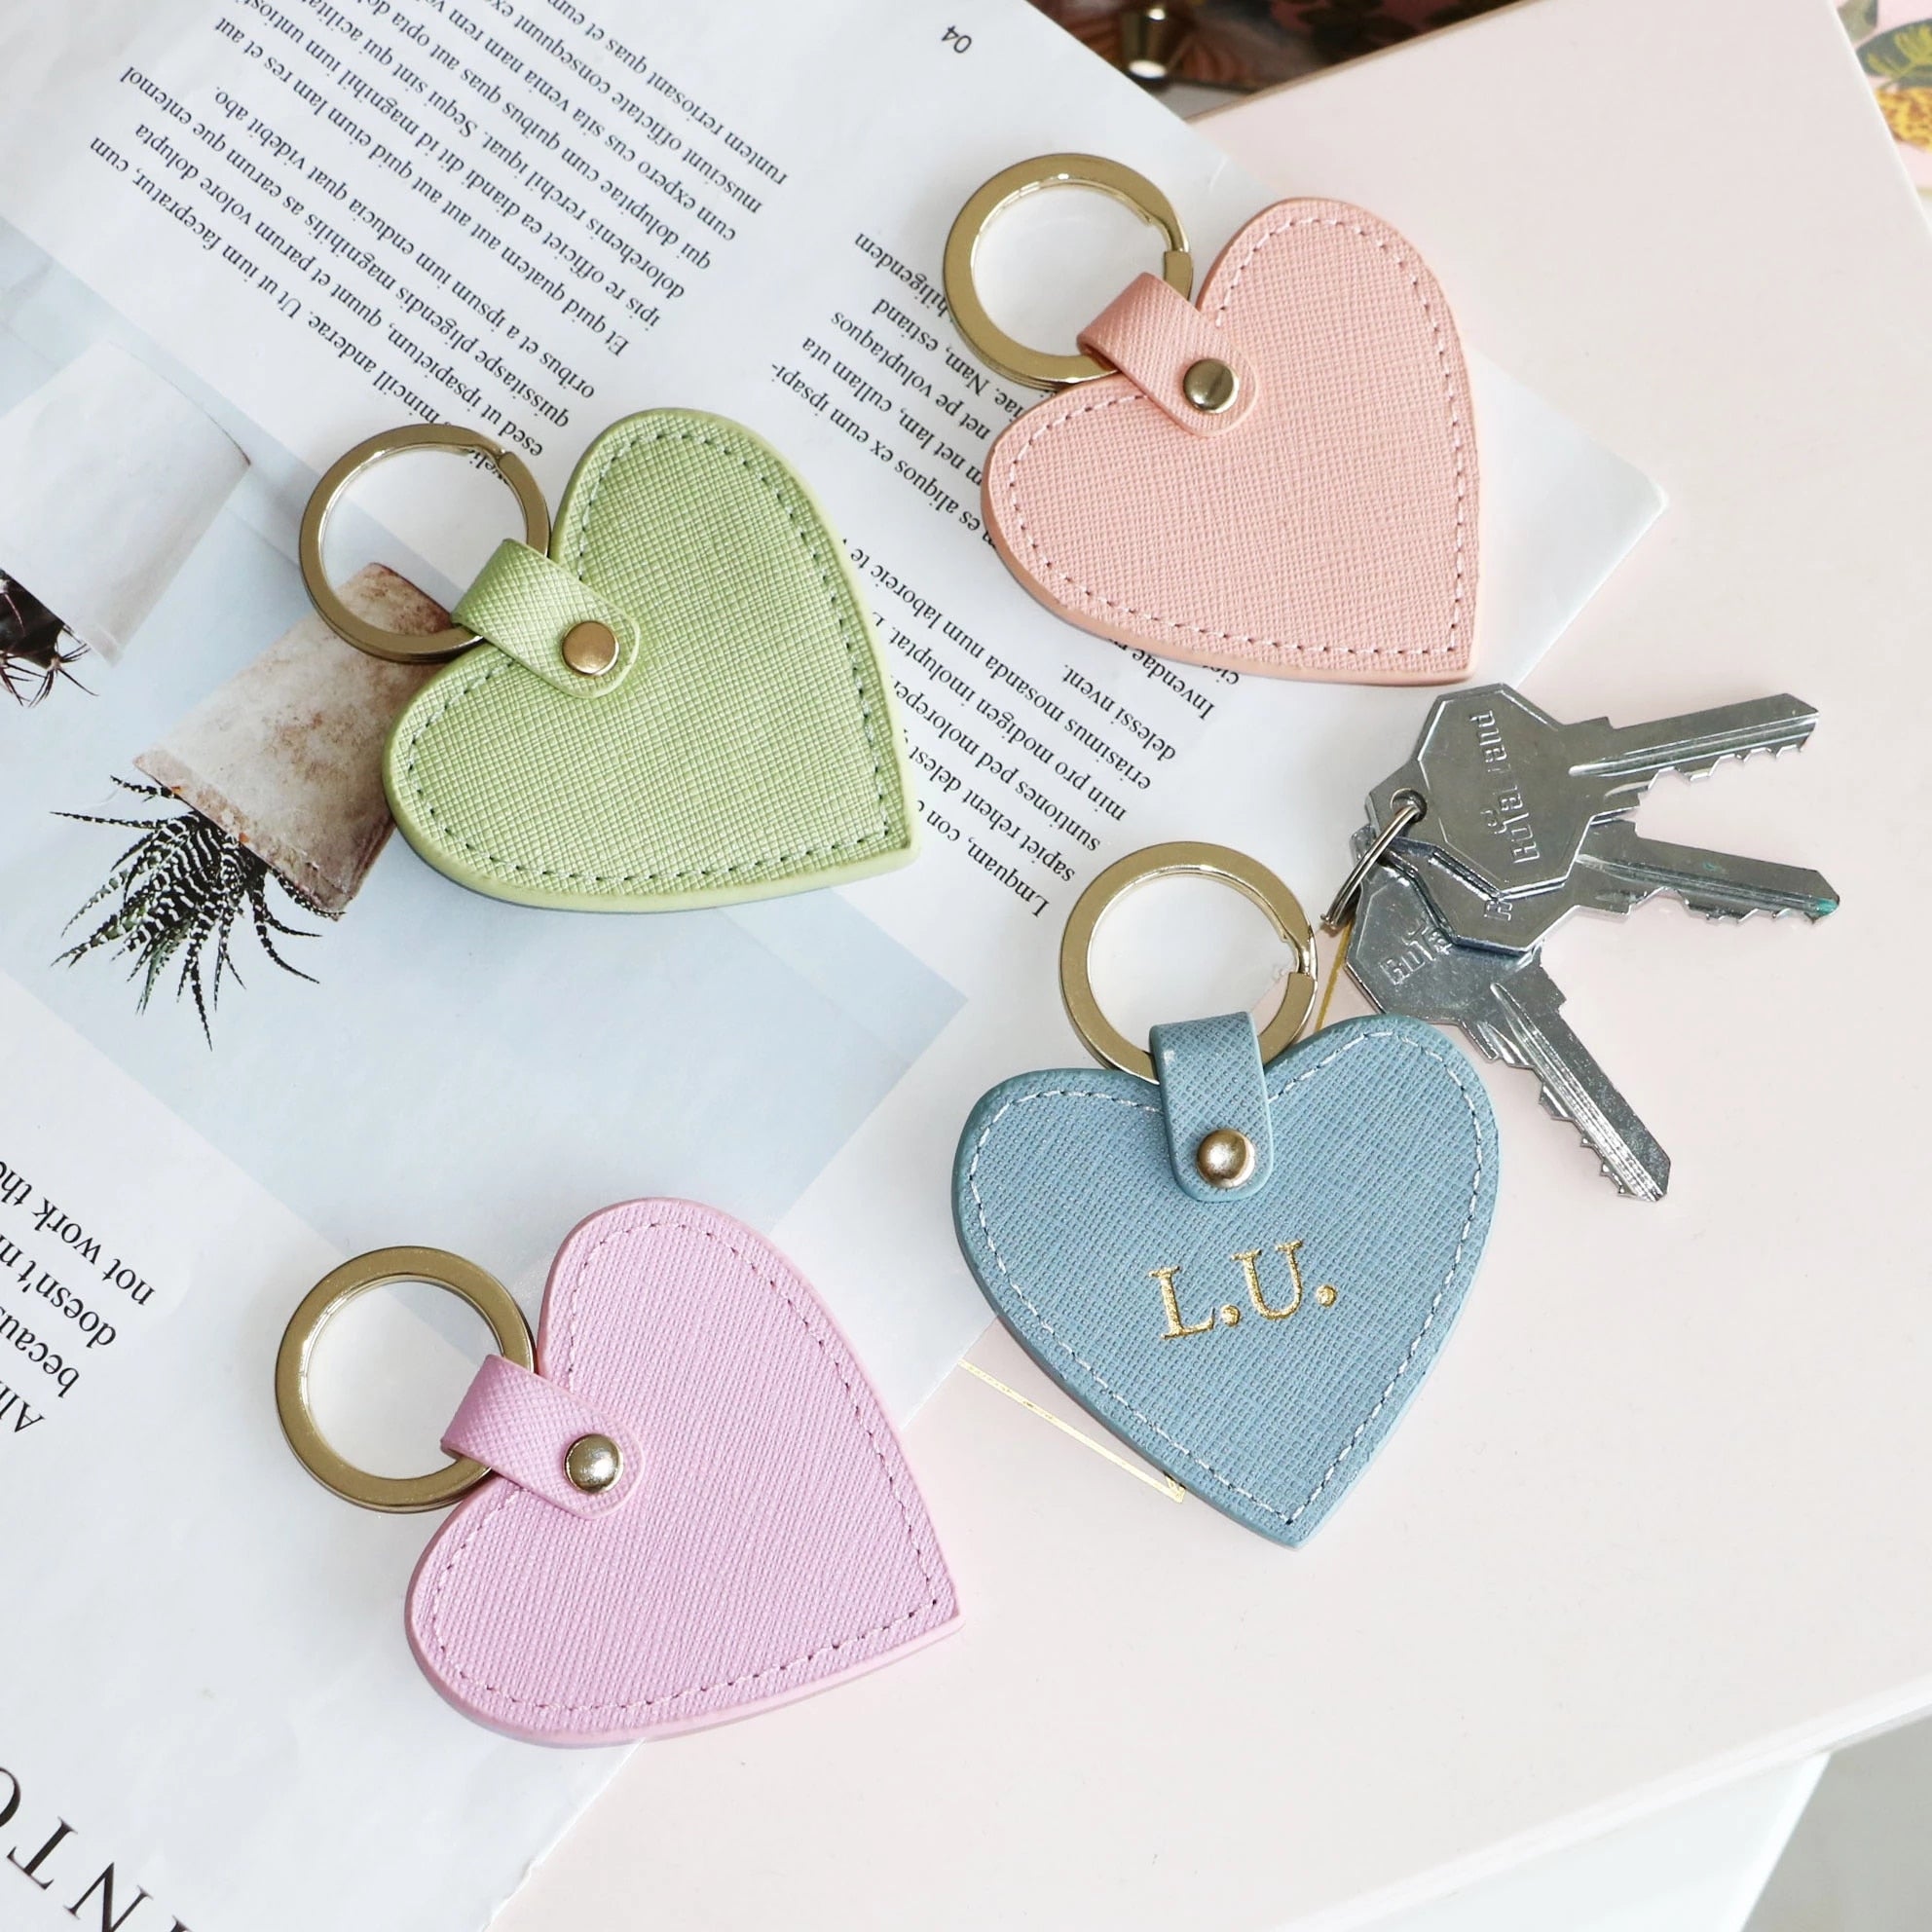 Personalised Leather Heart Keychain